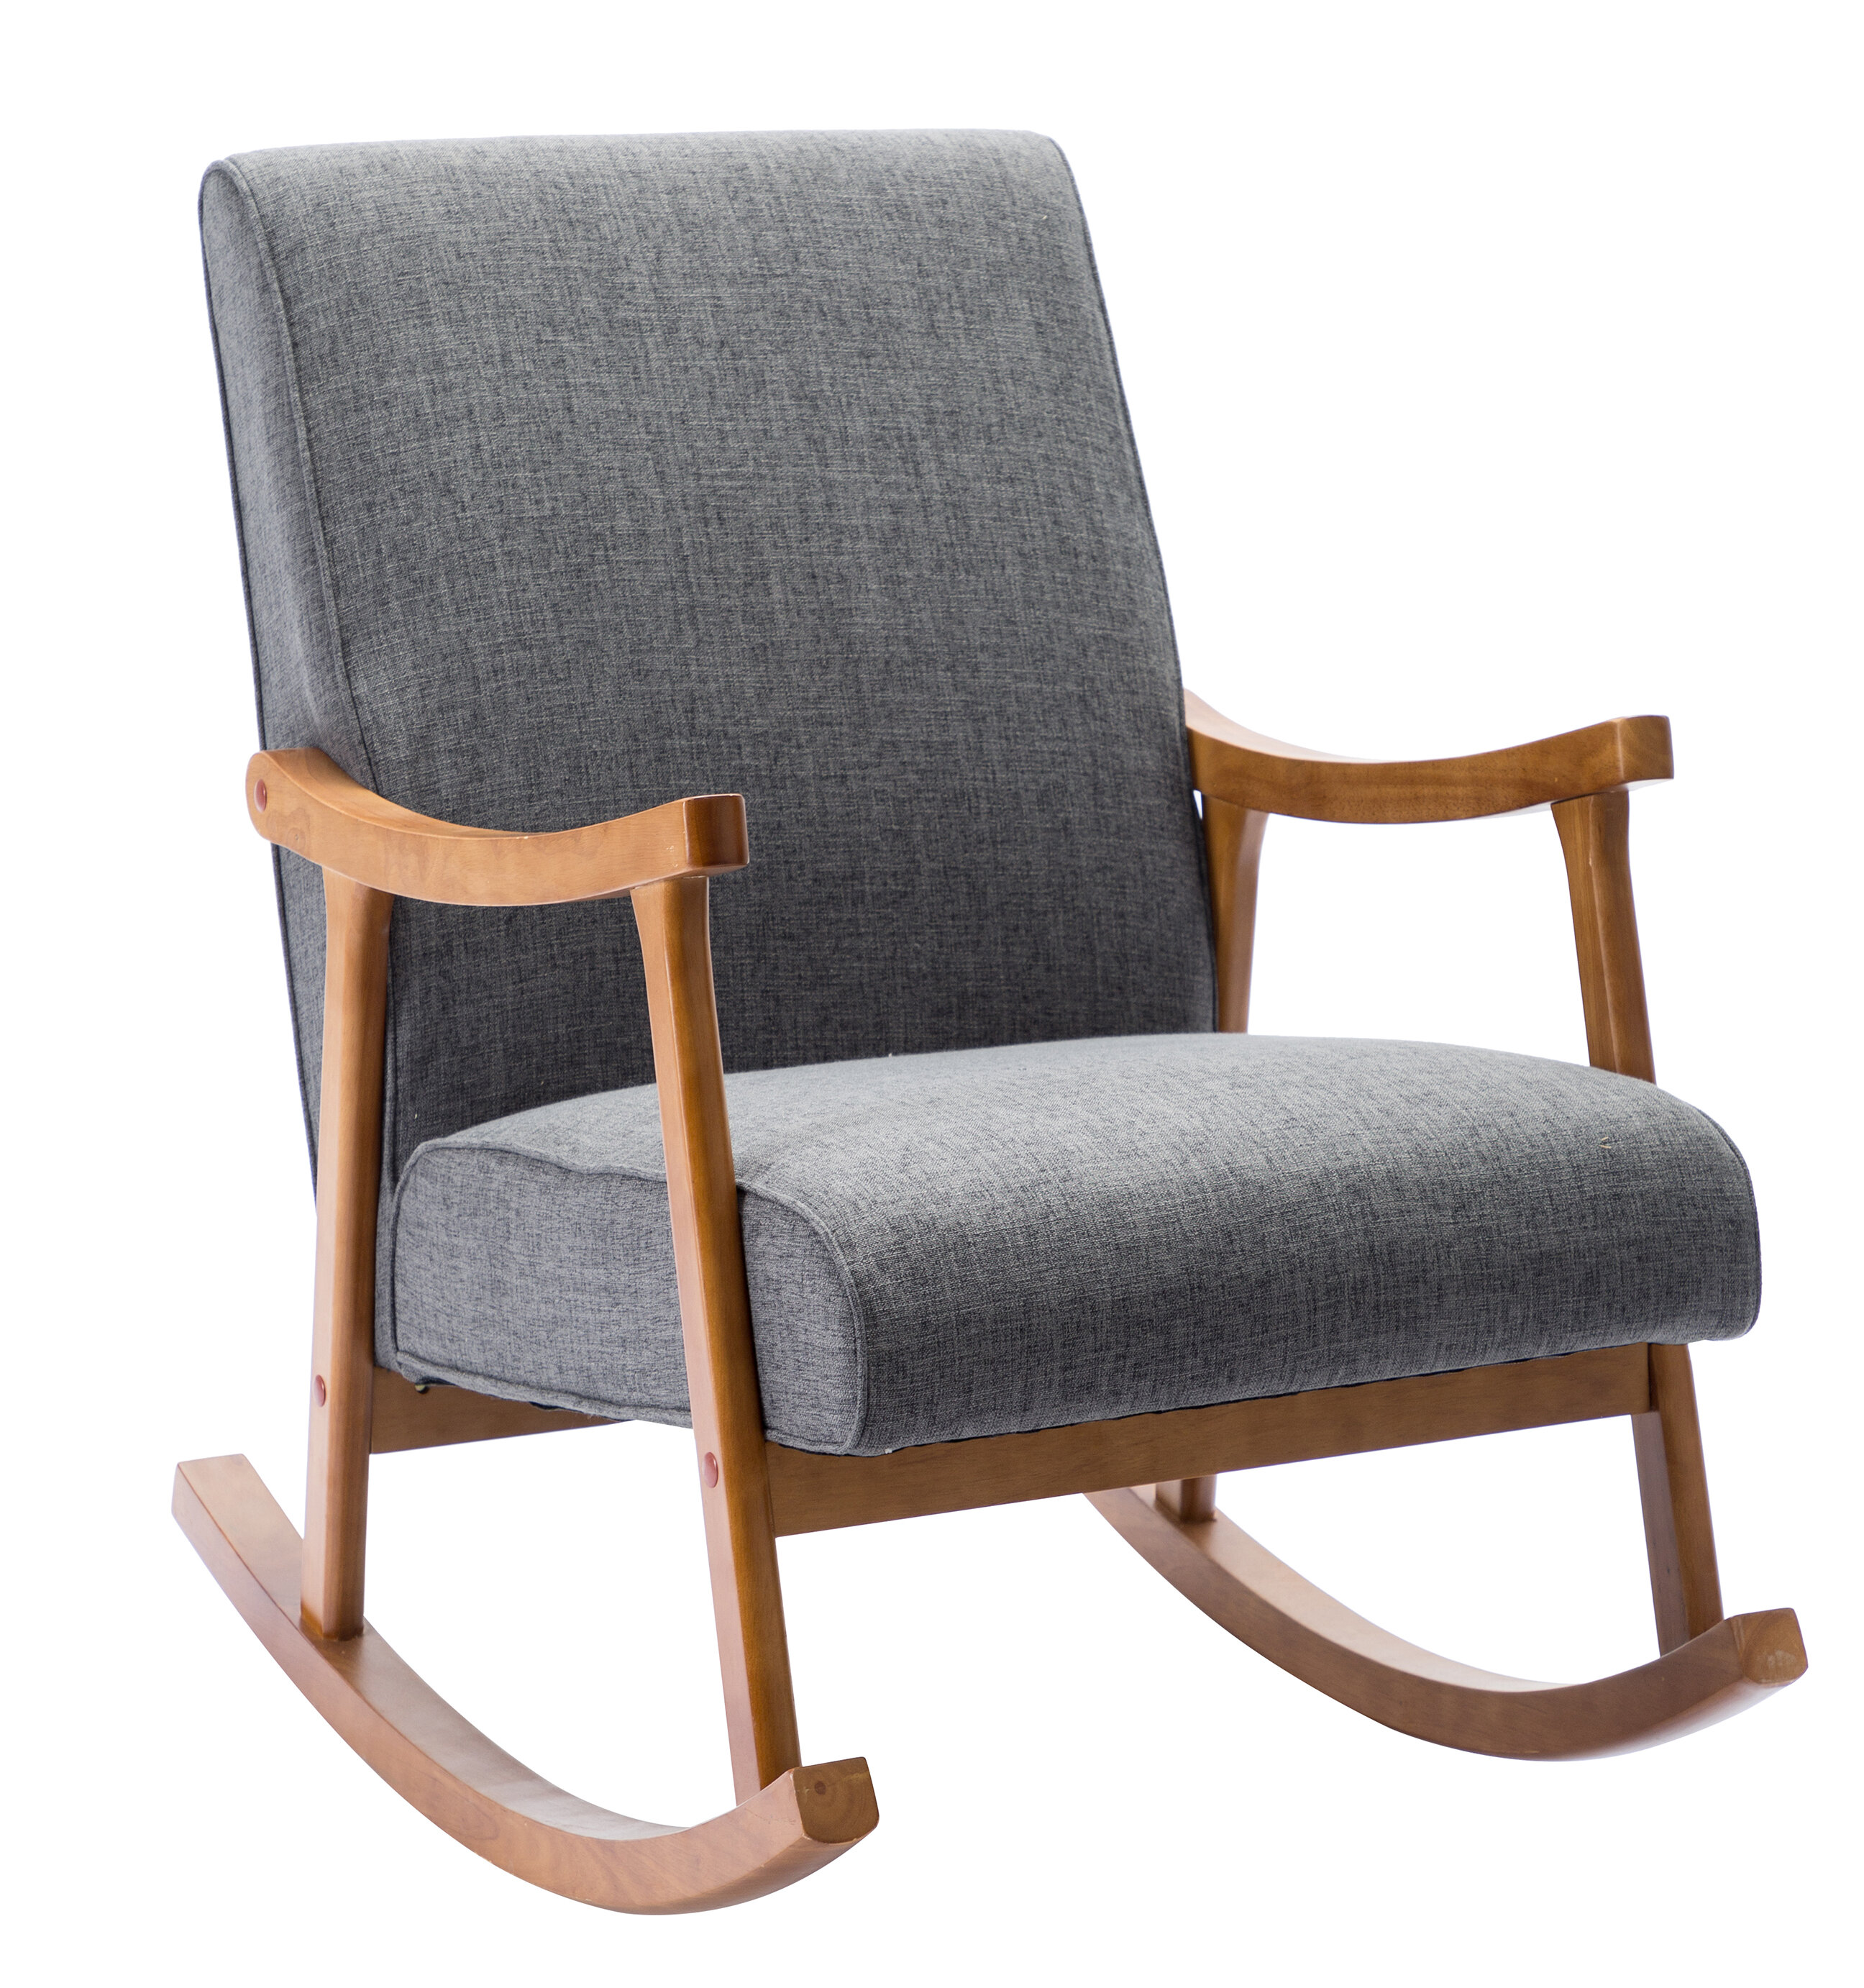 Featured image of post Mid Century Modern Wood Rocking Chair : Only caveat—the assemble instructions leave something to be desired.